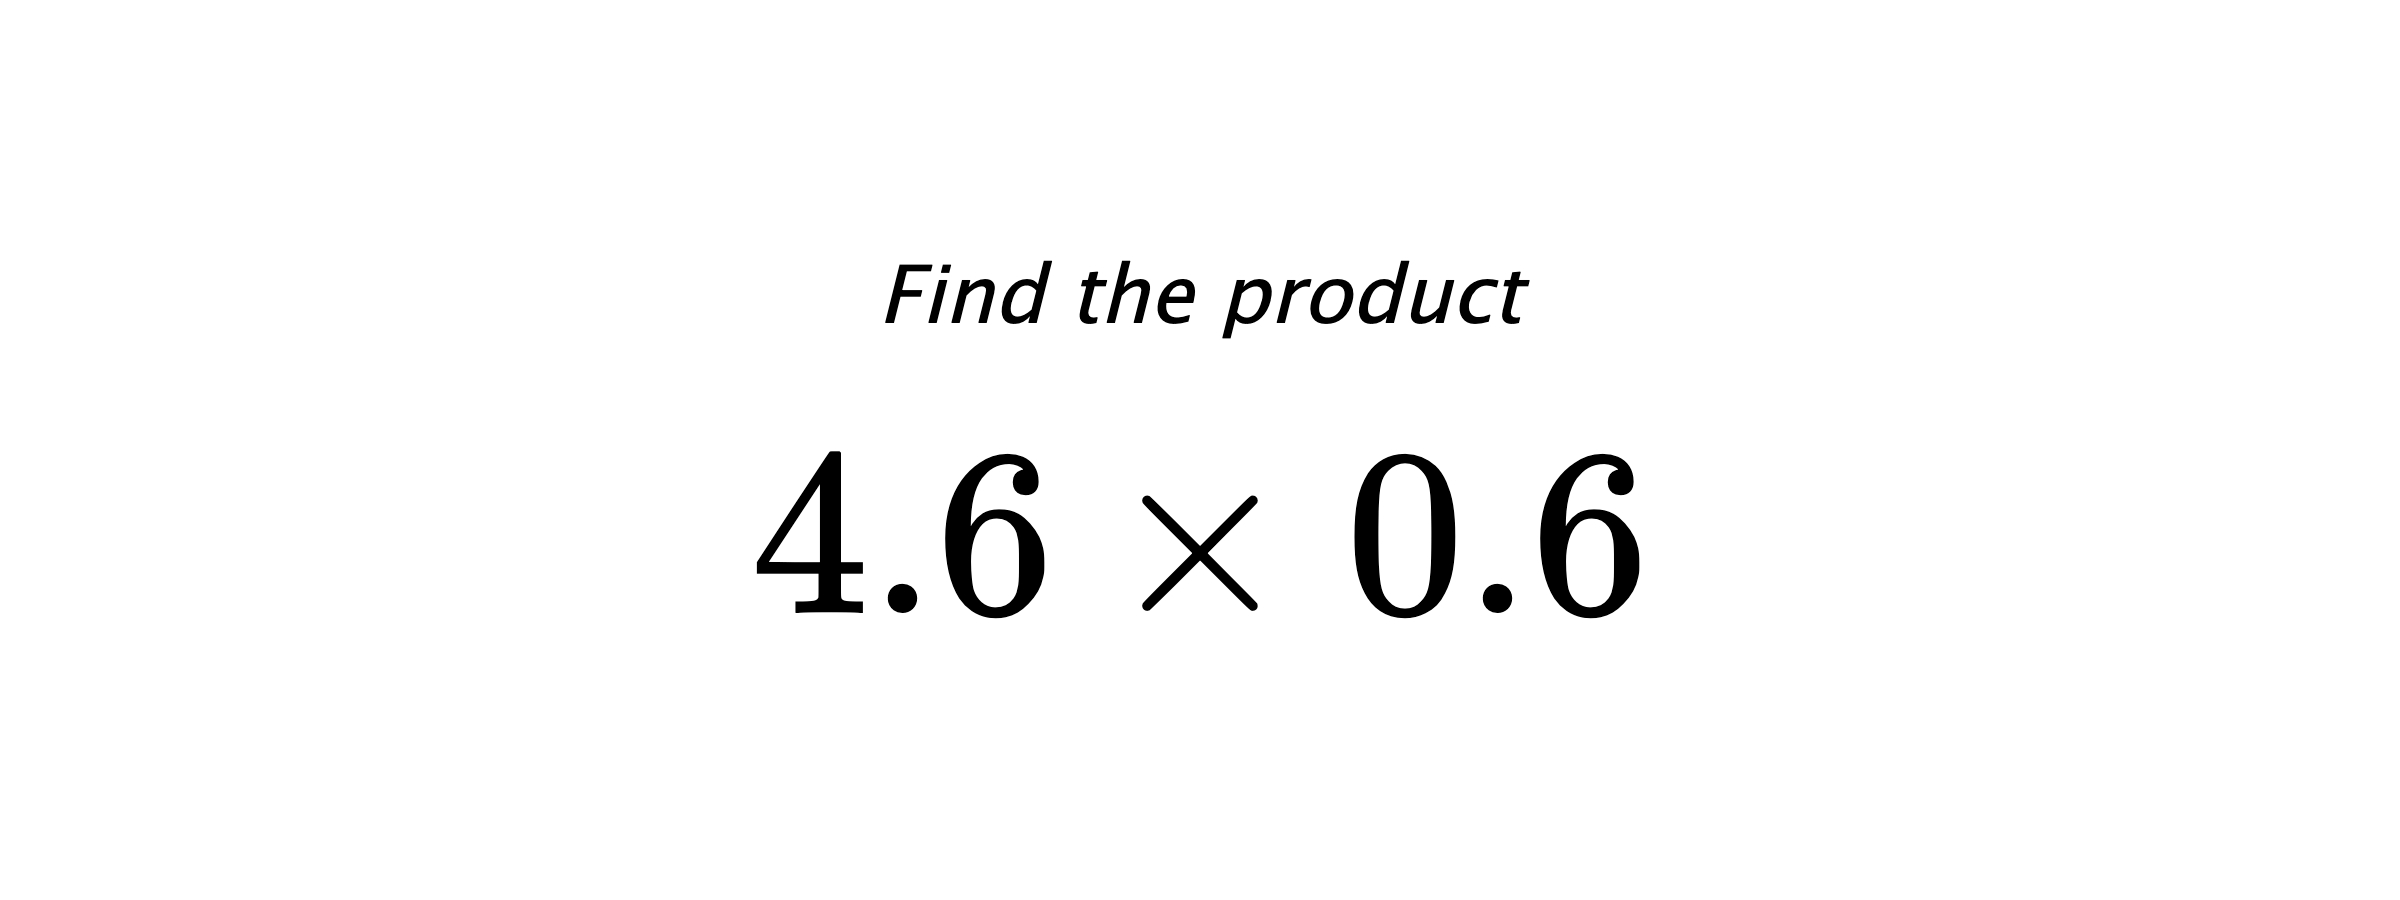 Find the product $ 4.6 \times 0.6 $